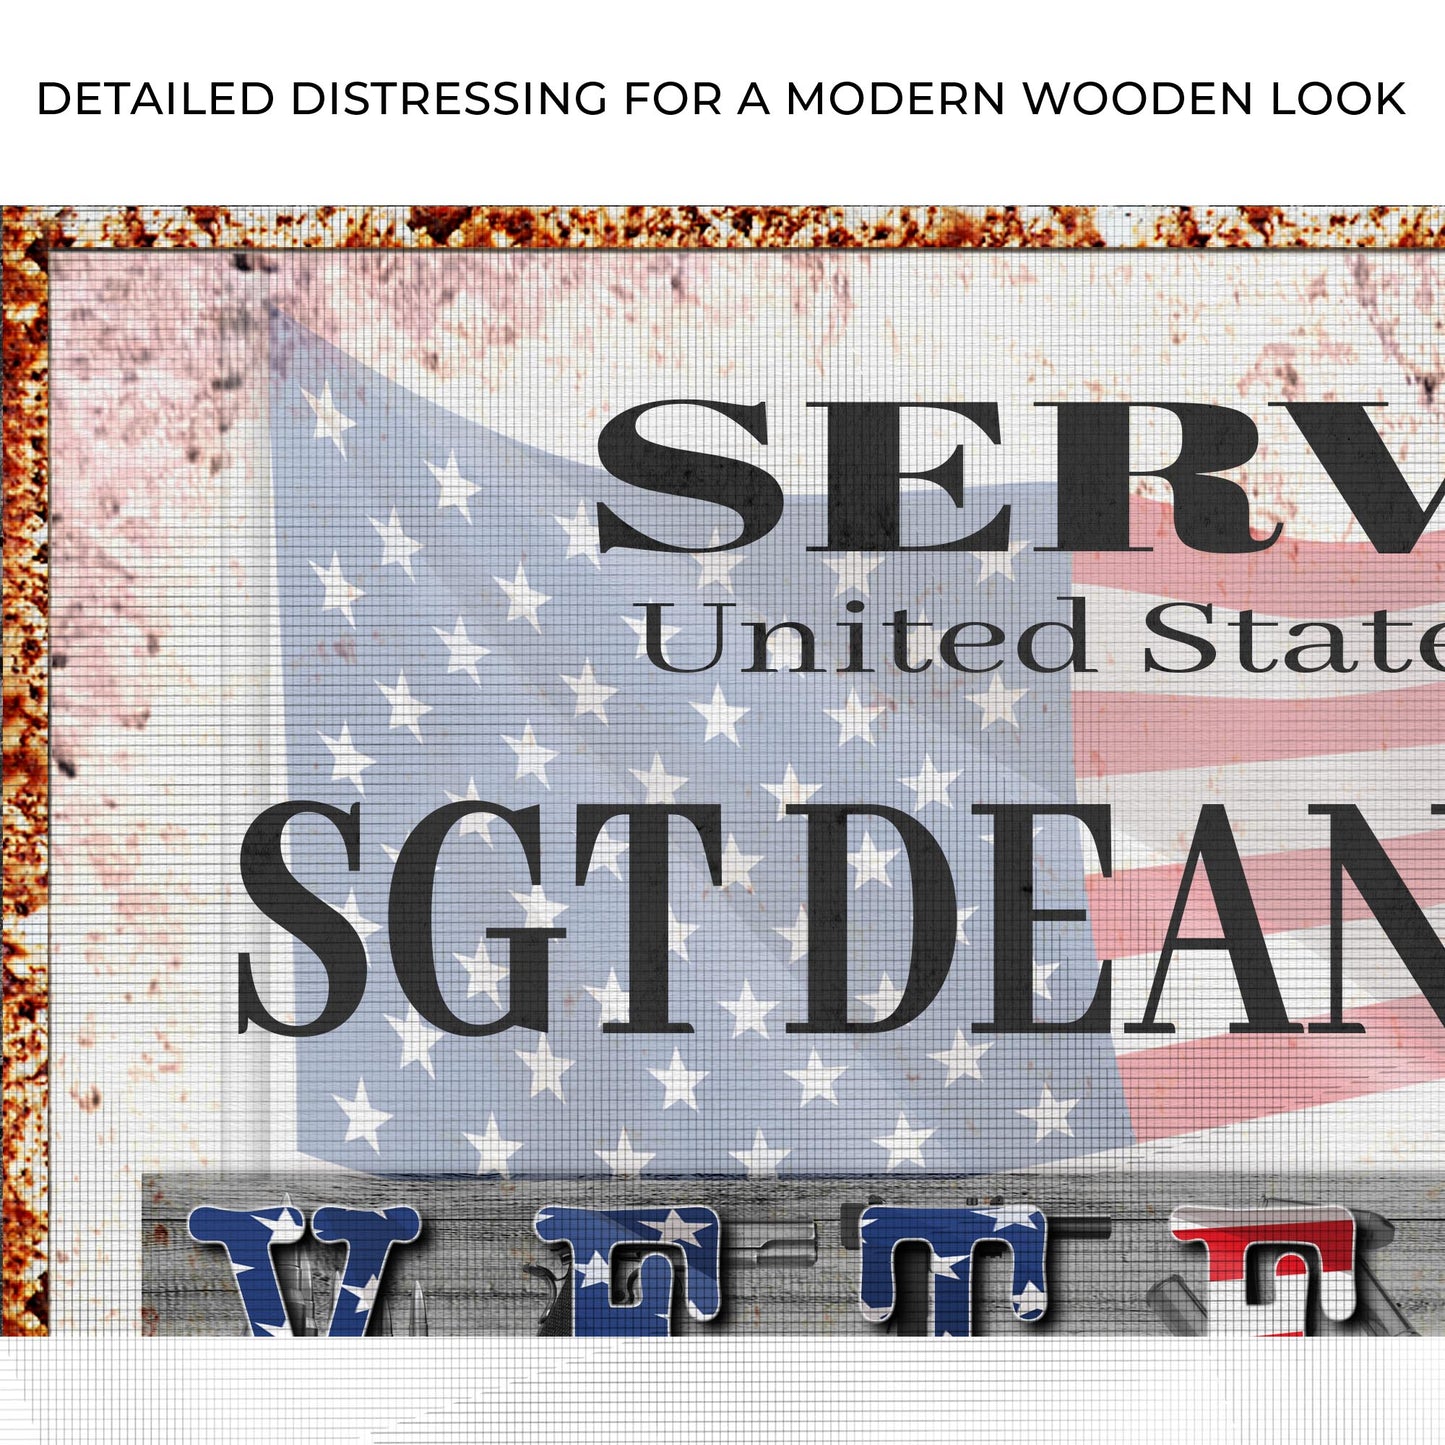 Thank You For Your Service Veterans Sign | Customizable Canvas Zoom - Image by Tailored Canvases